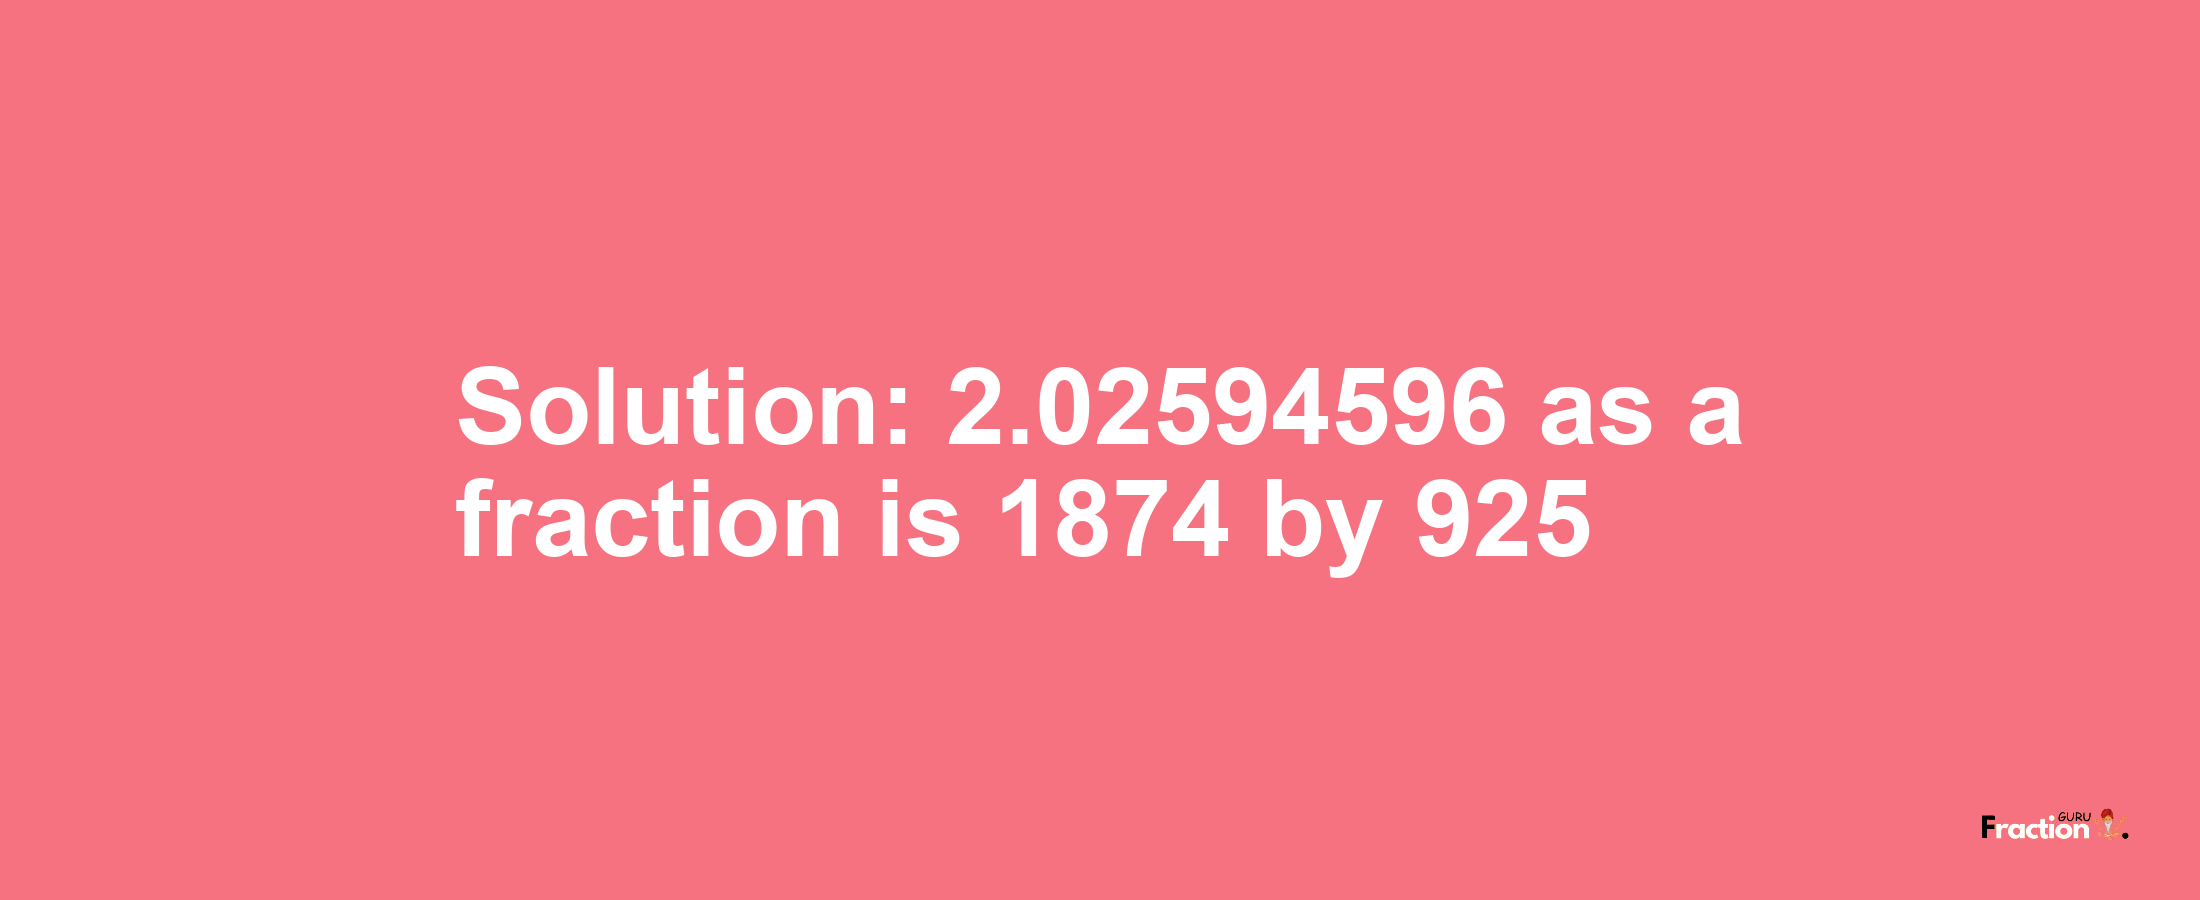 Solution:2.02594596 as a fraction is 1874/925